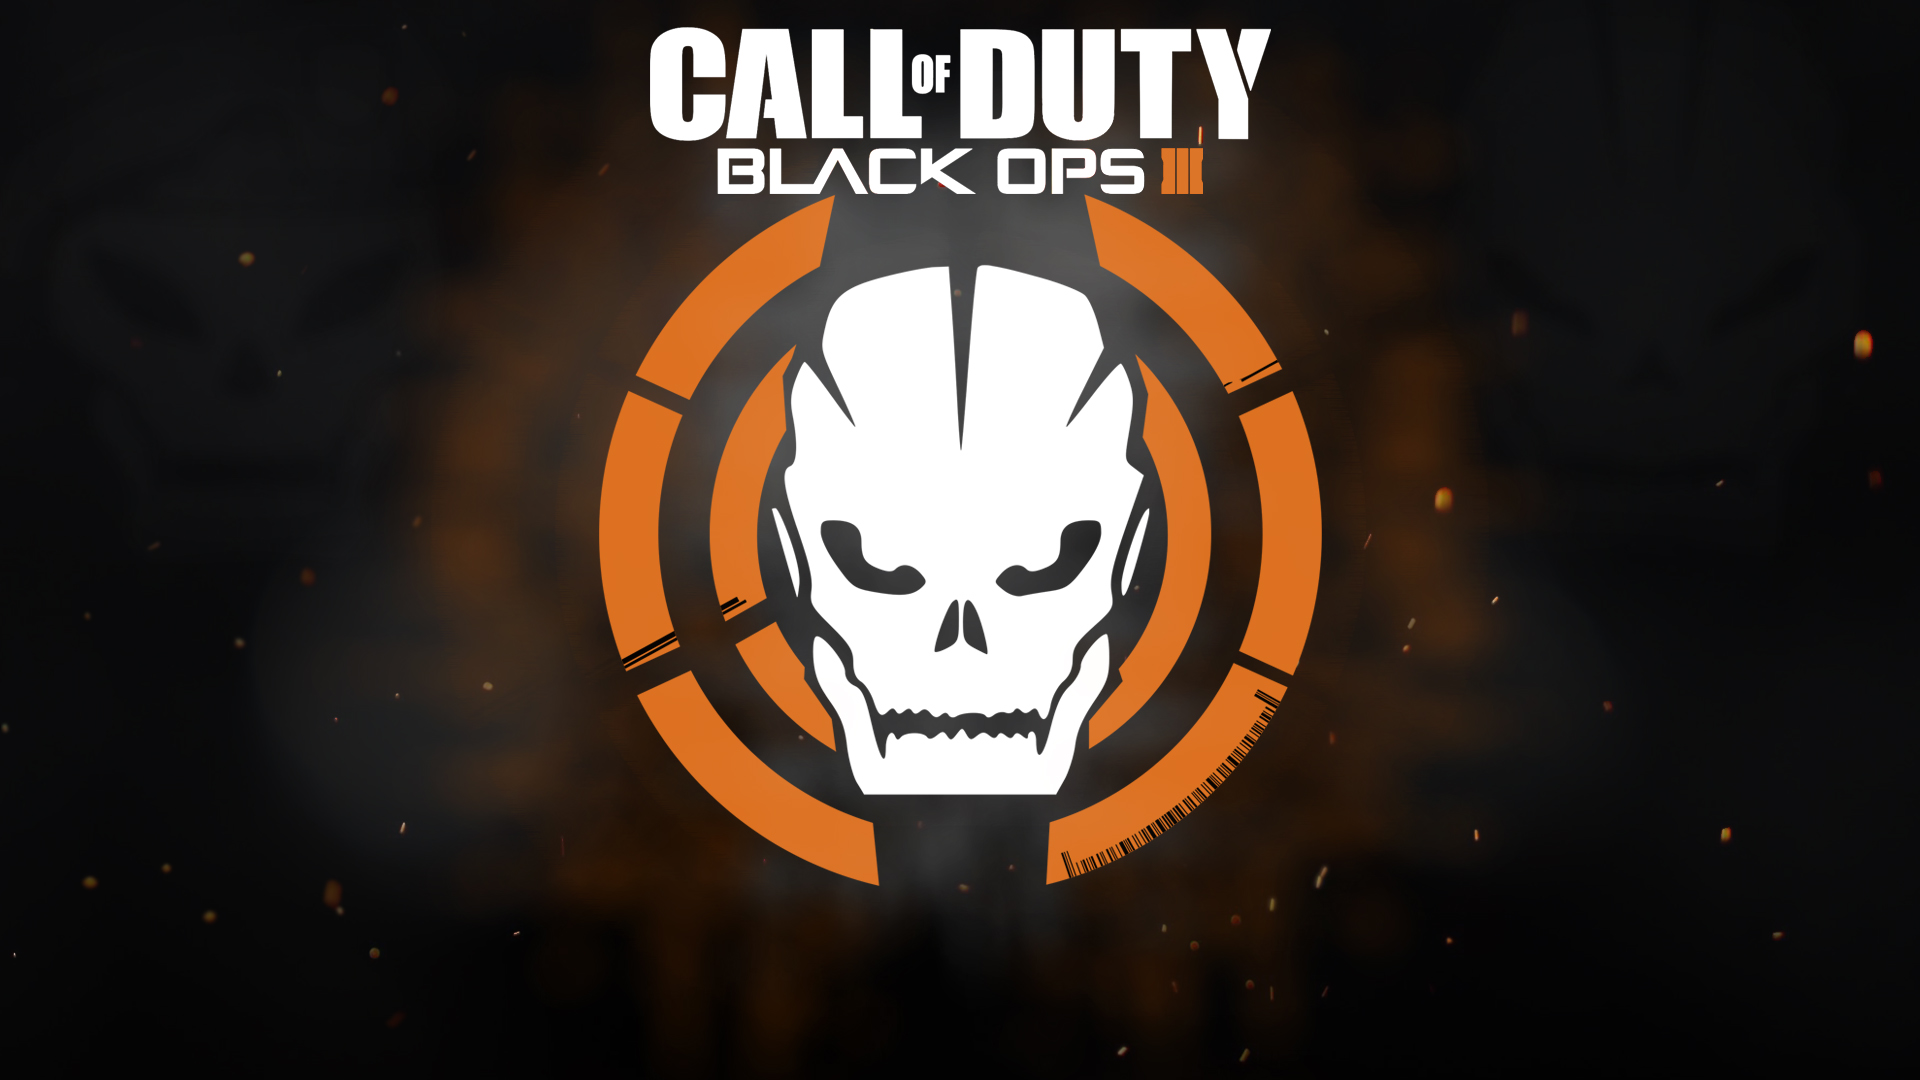 Call of Duty Black Ops 3 Wallpaper 02 by Toby Affenbude toby 1920x1080